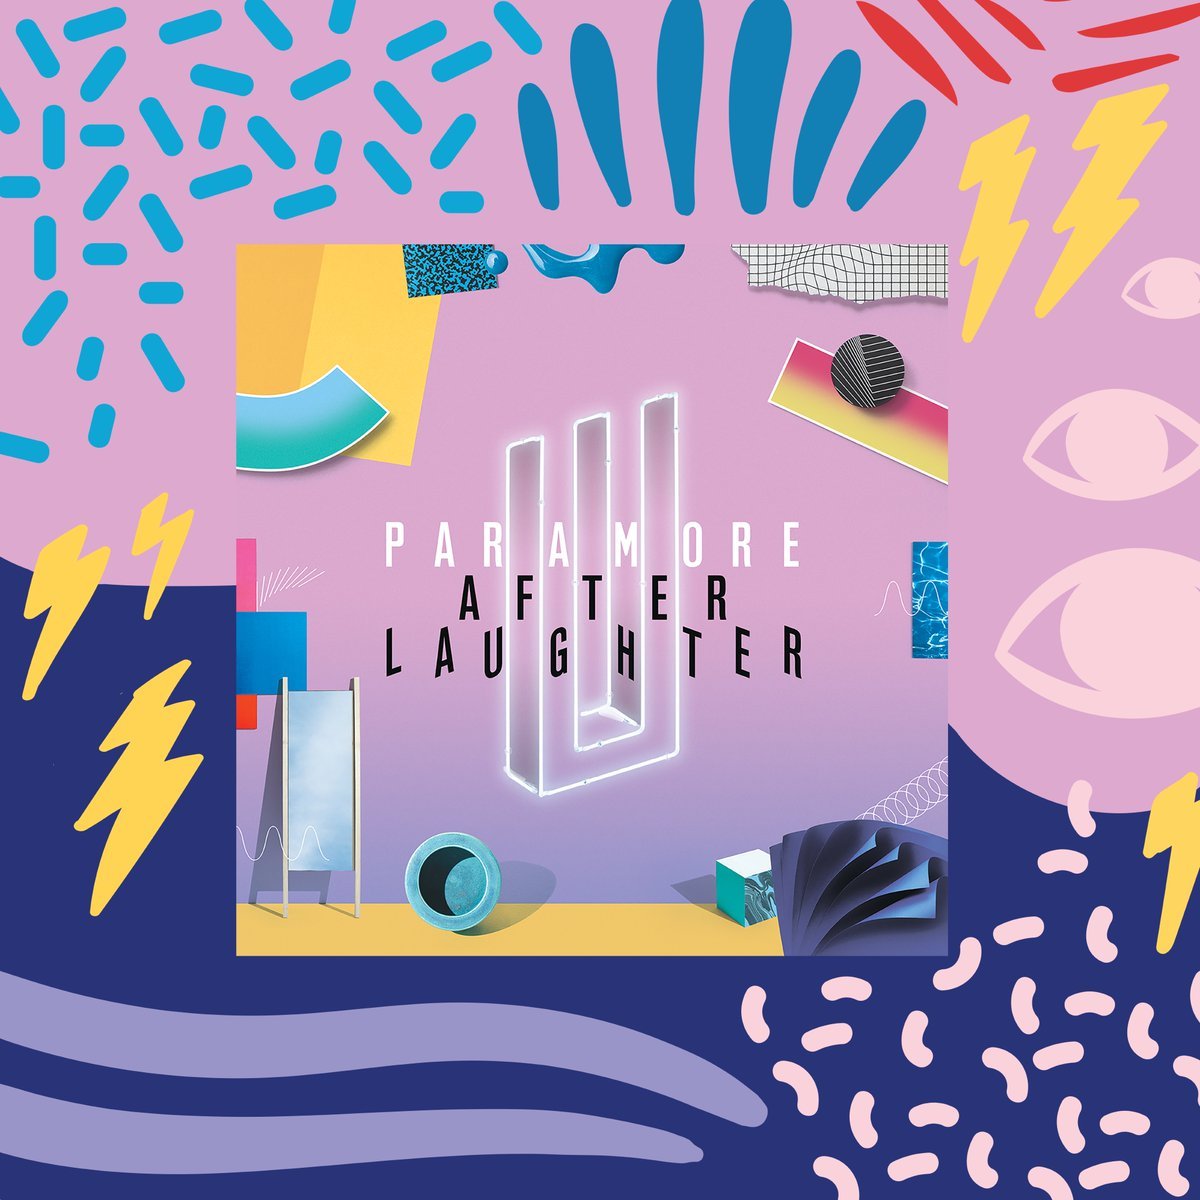 Paramore After Laughter Wallpaper